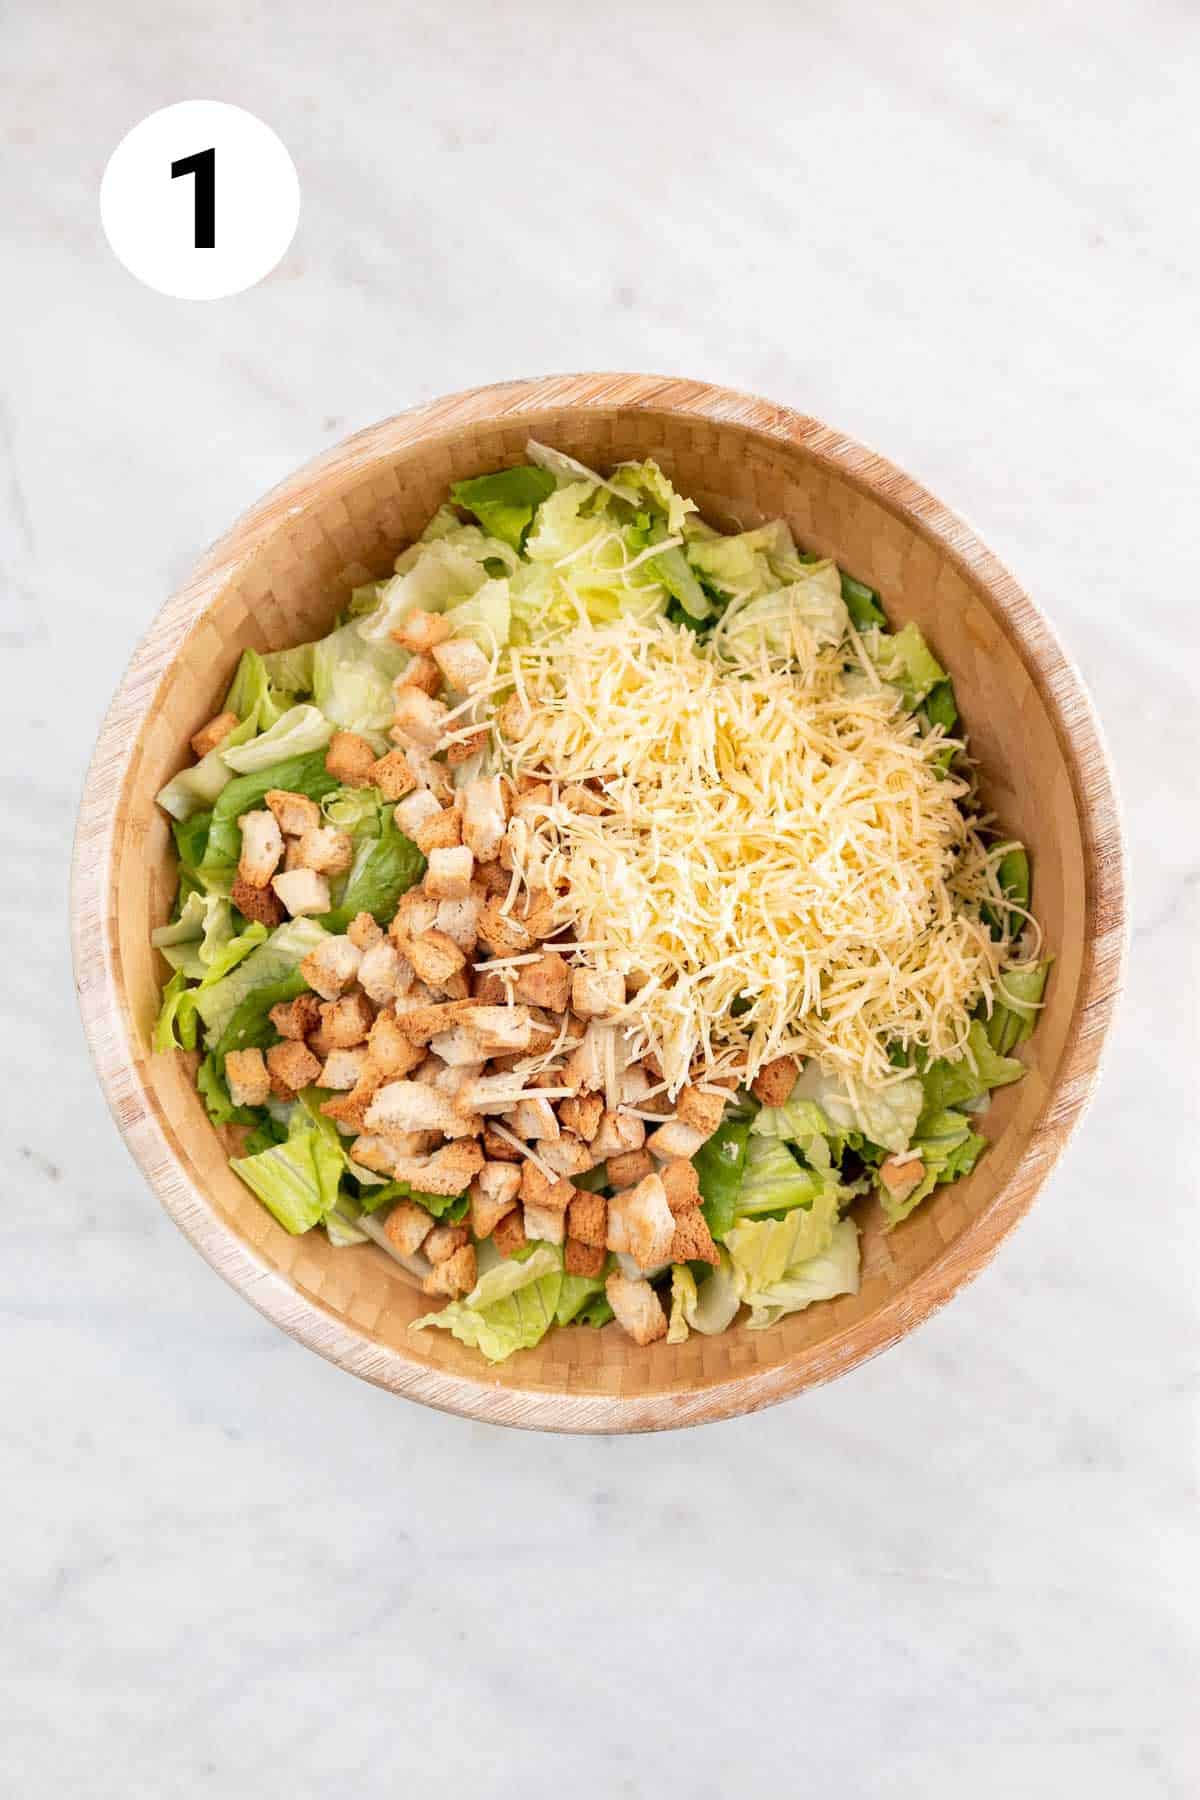 Romaine lettuce, vegan cheese, and croutons arranged in a large mixing bowl.